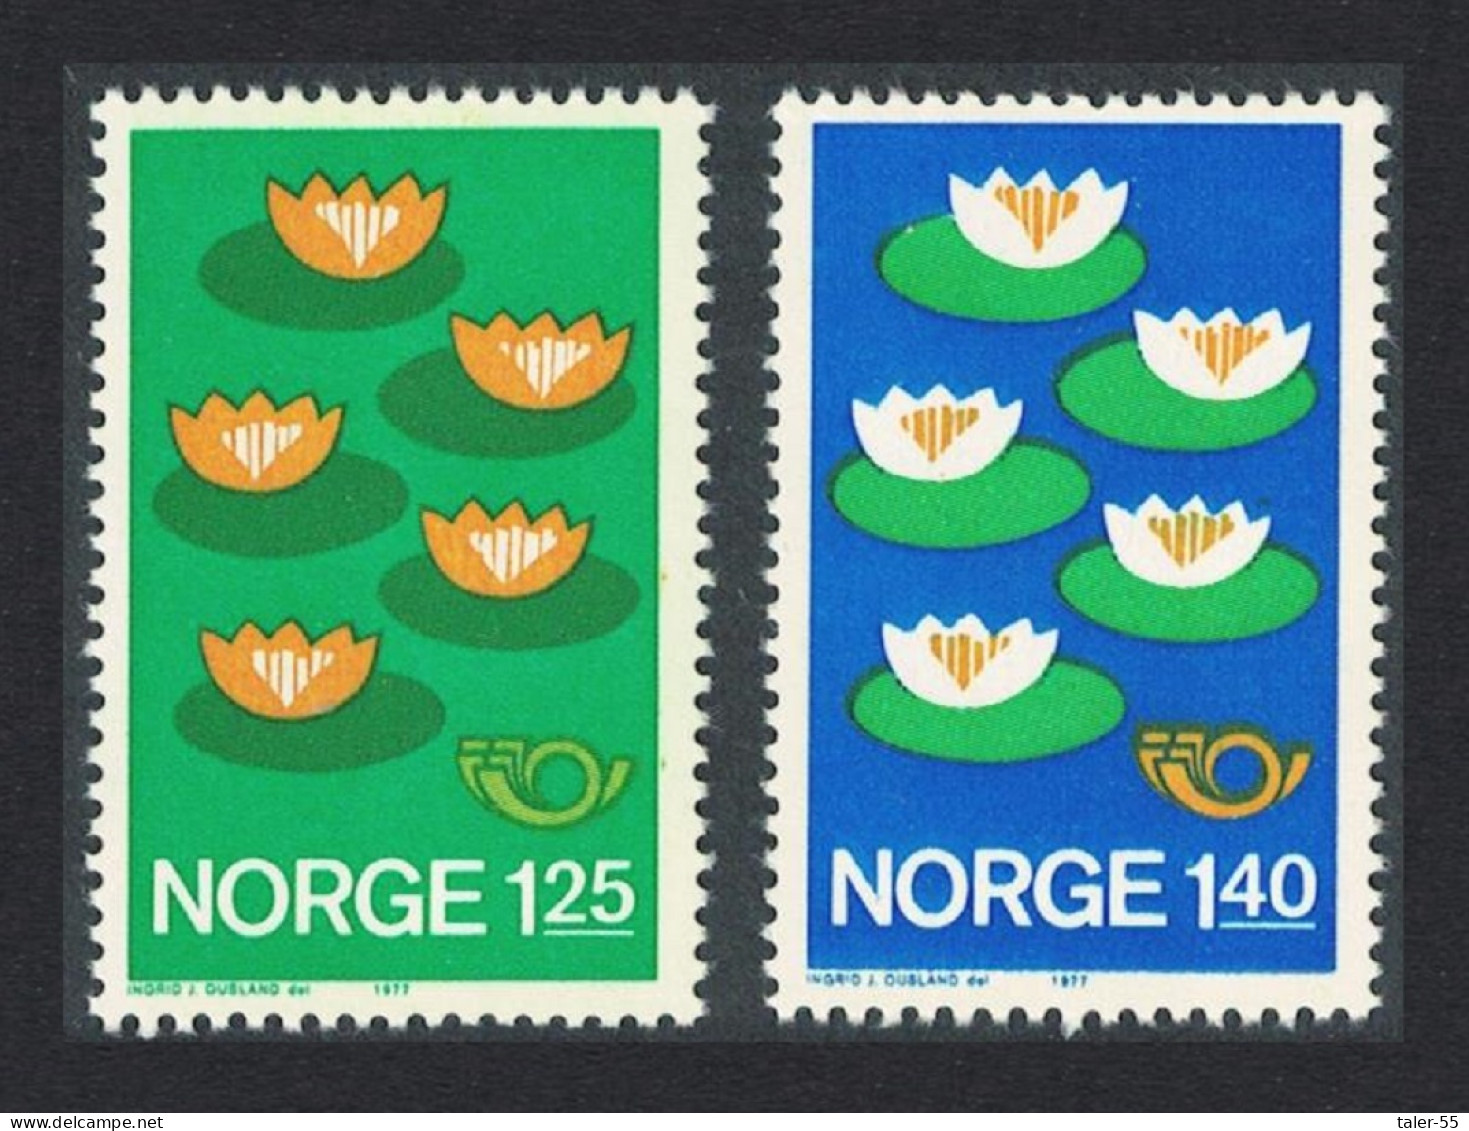 Norway Lotus Flower Environment Protection 2v Joint Issue 1977 MNH SG#770-771 MI#737-738 Sc#688-689 - Unused Stamps